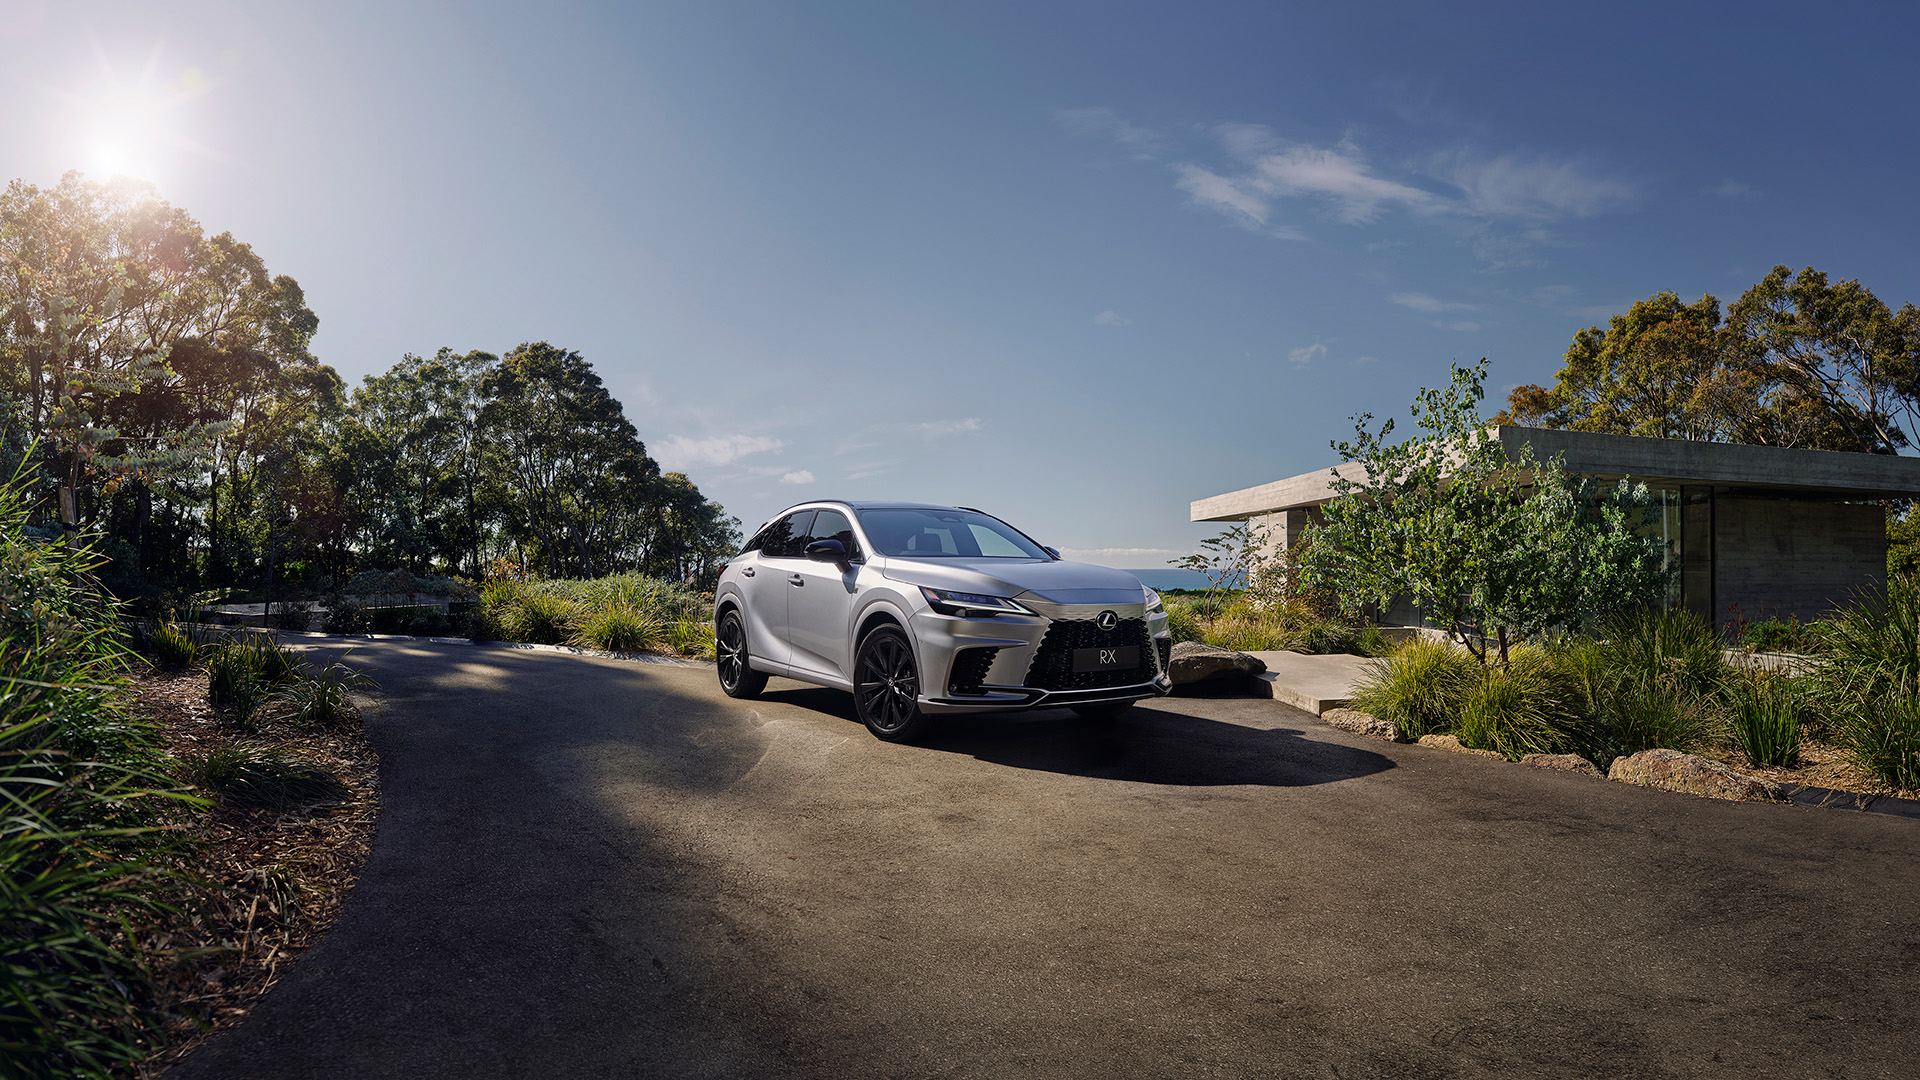 Lexus RX / Discover the Global World of Lexus